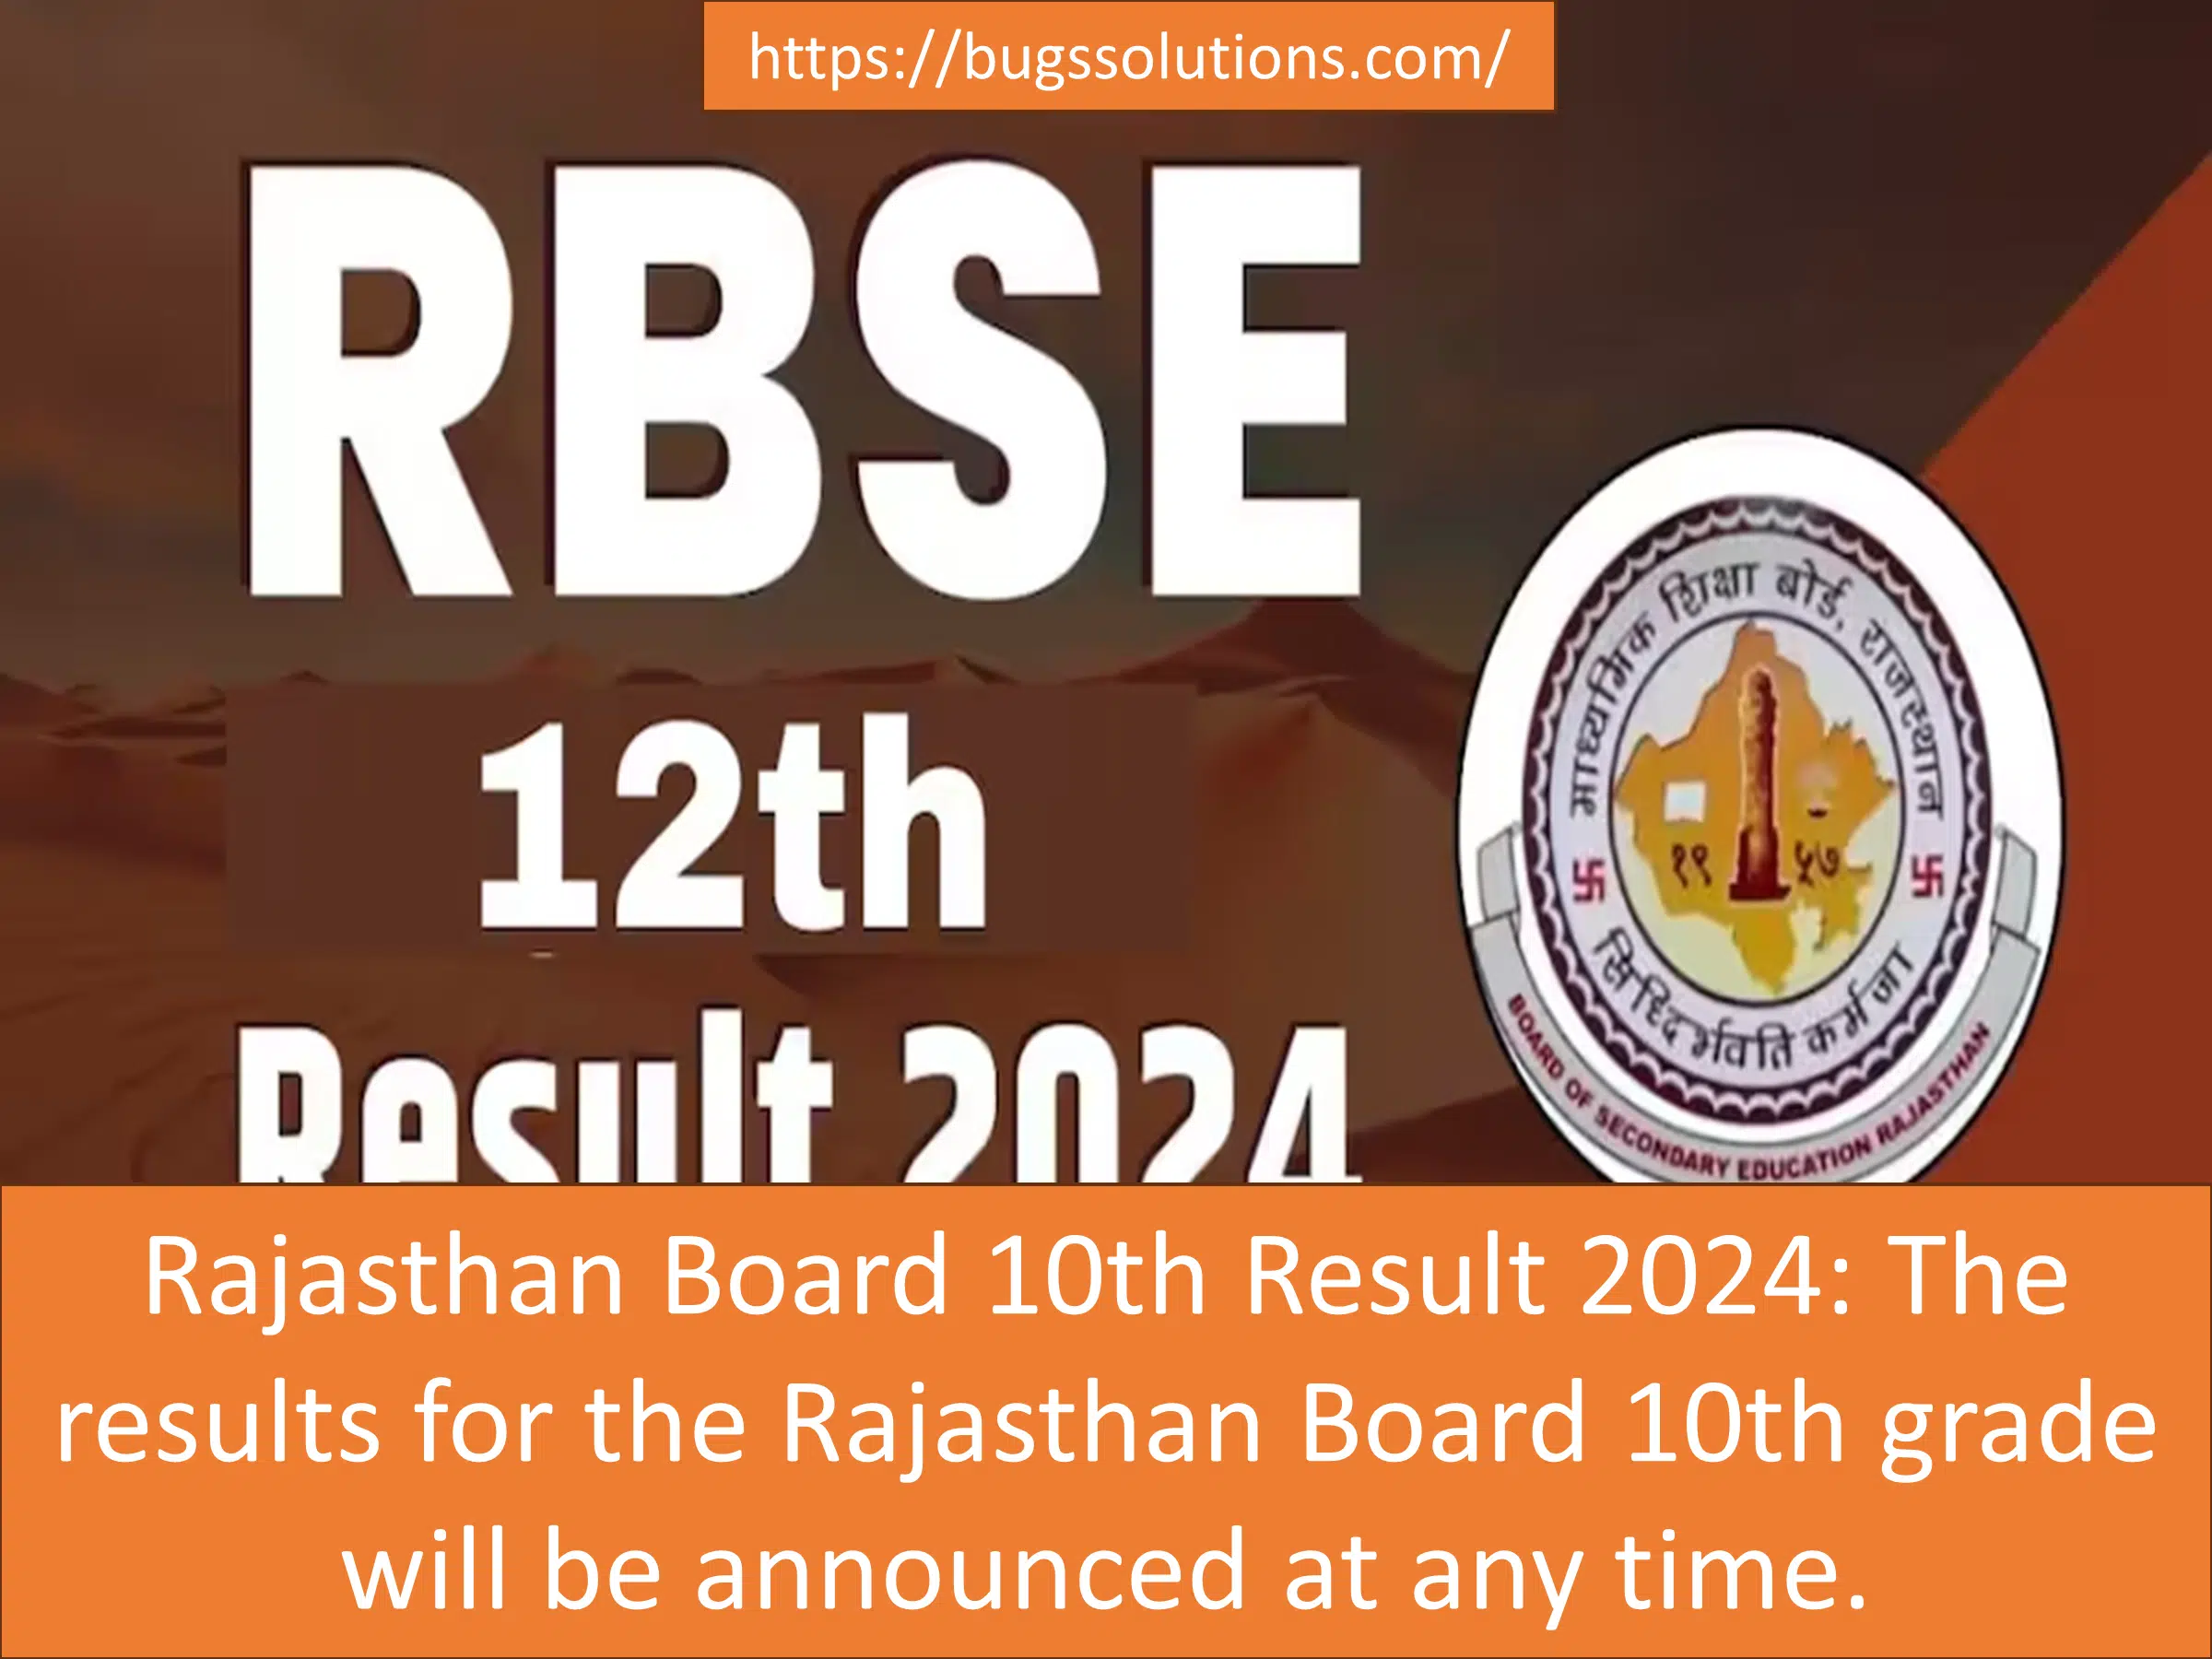 Rajasthan Board 10th Result 2024: The results for the Rajasthan Board 10th grade will be announced at any time.